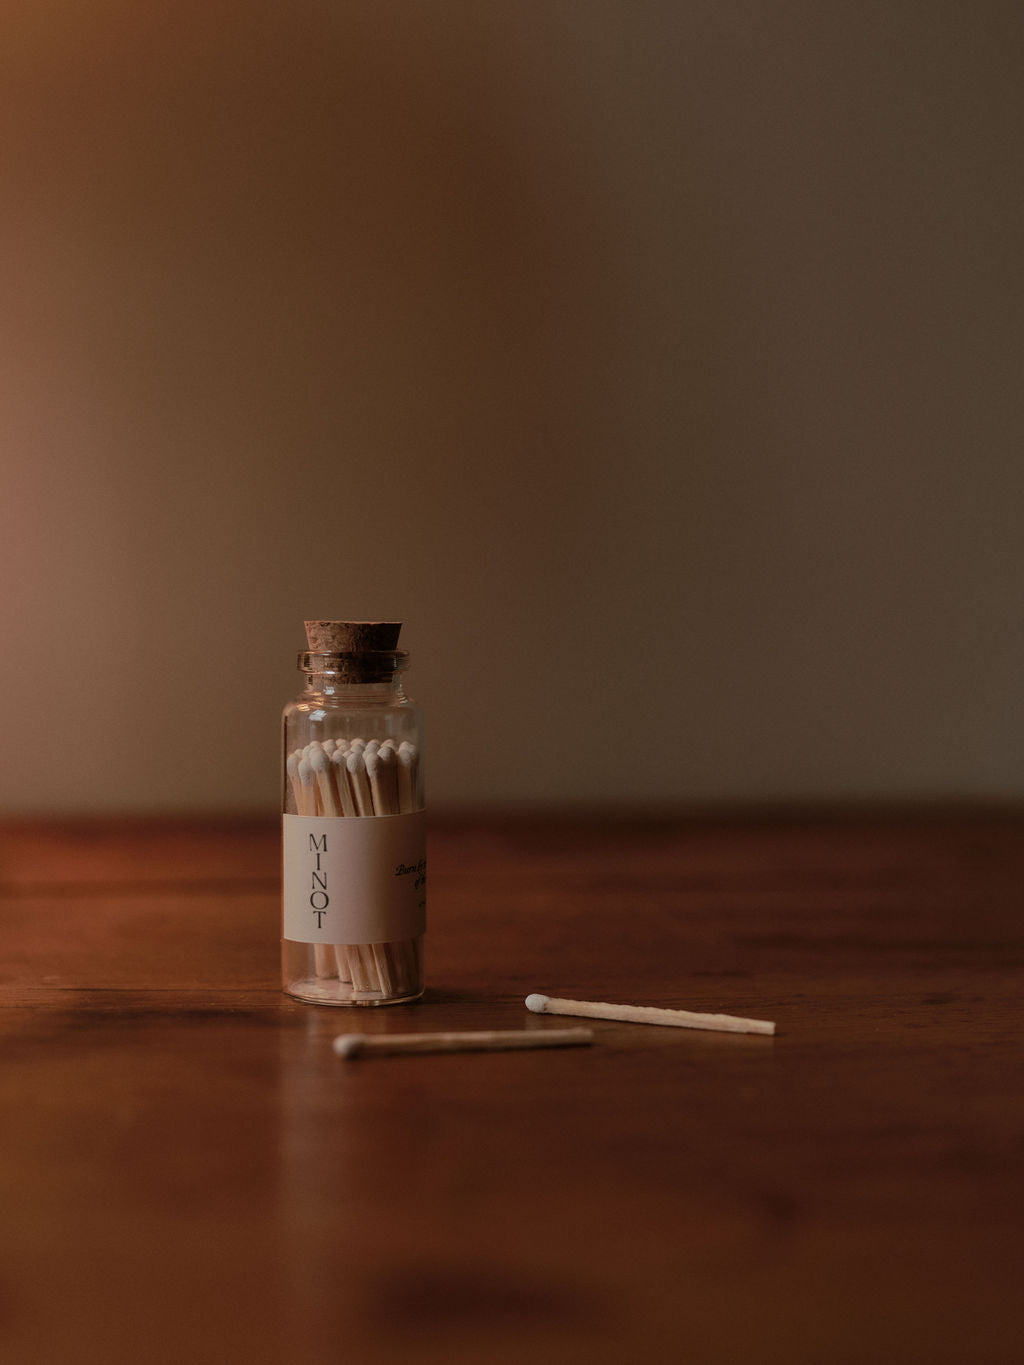 A beautiful, tiny glass jar of MINOT safety matches with a cork top and two loose matches on a table